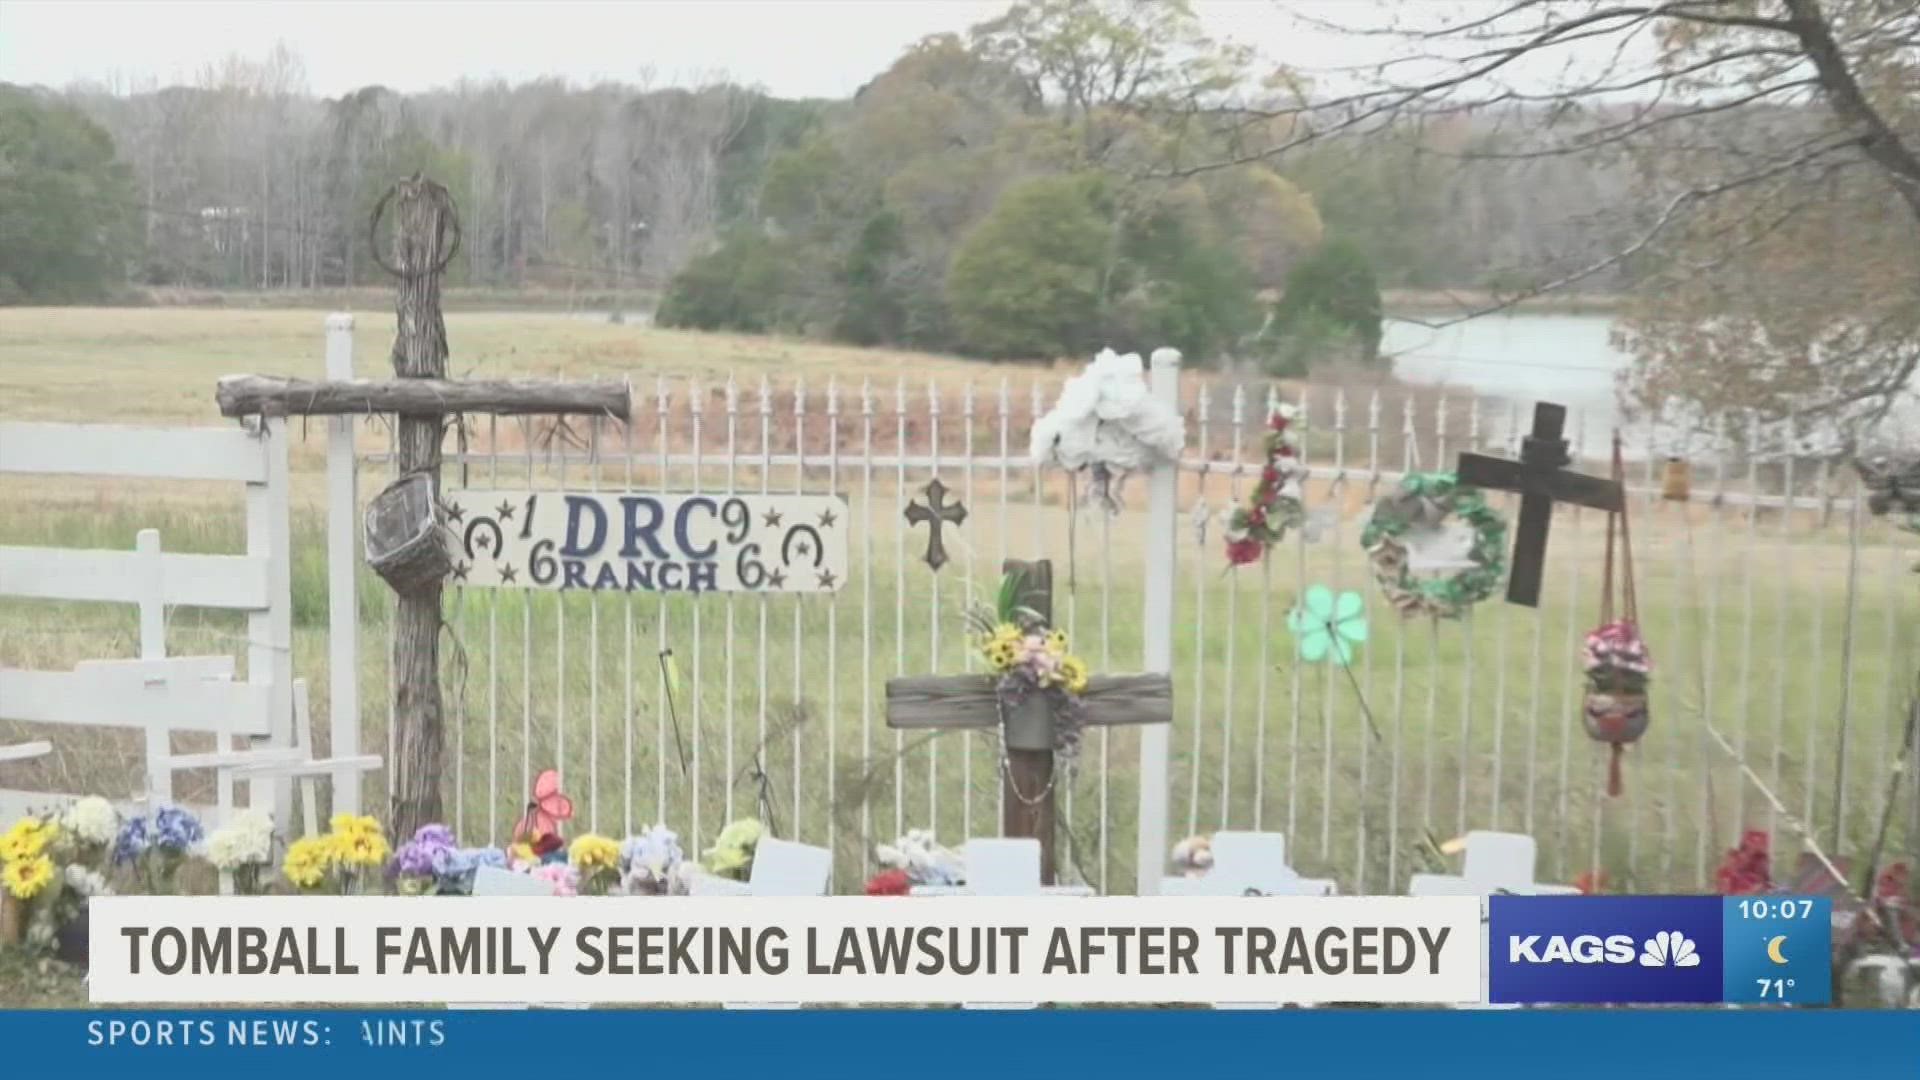 Centerville residents shared how the community is still shocked after the June tragedy and partially blame the TDCJ for things they claim could have been prevented.